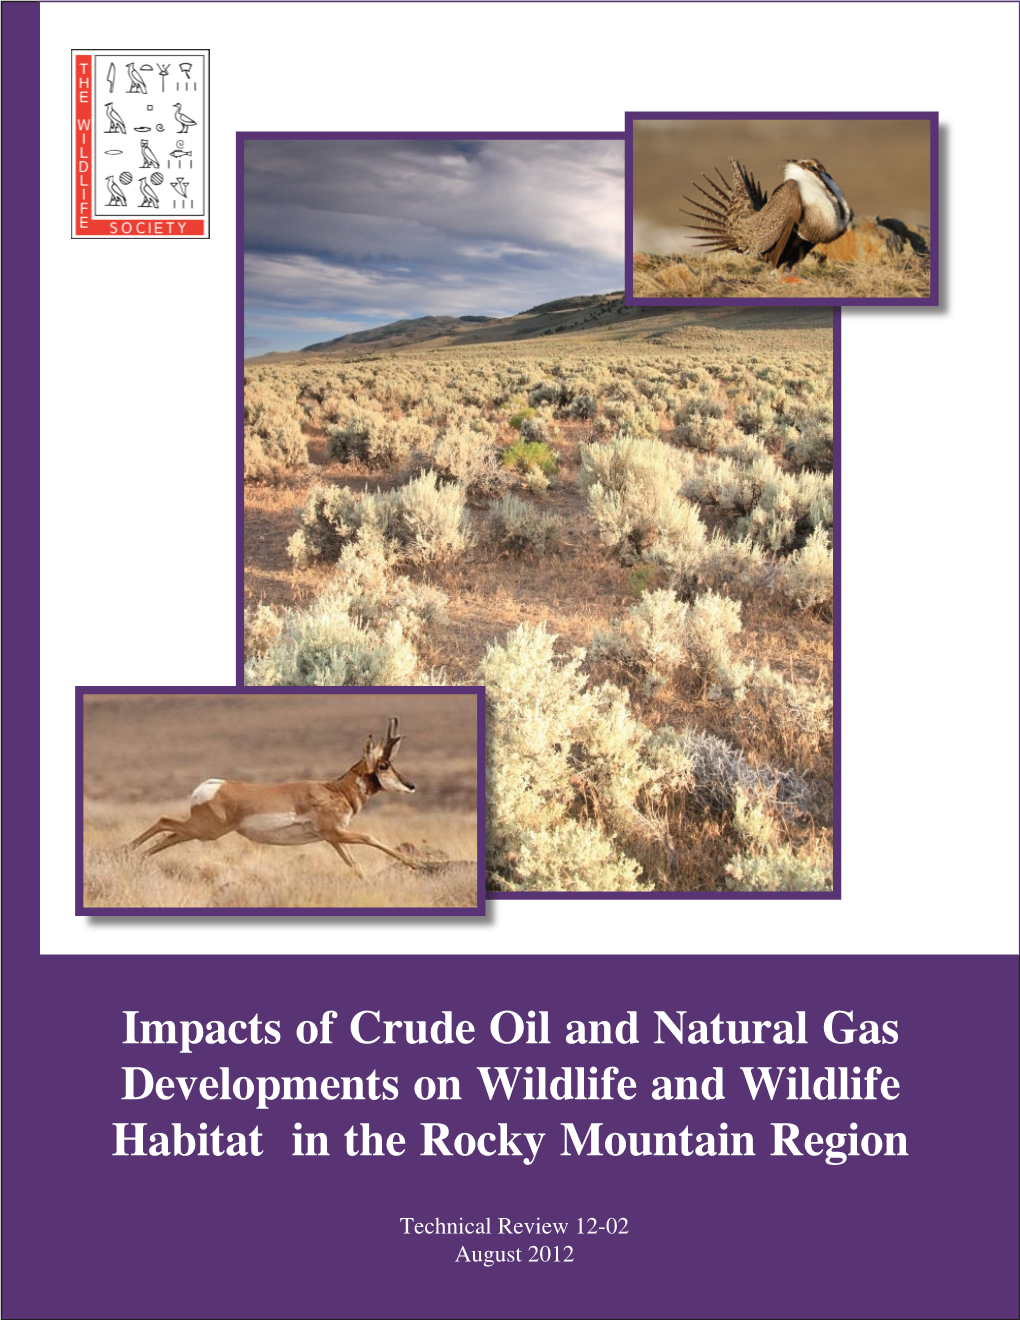 Impacts of Crude Oil and Natural Gas Developments on Wildlife and Wildlife Habitat in the Rocky Mountain Region